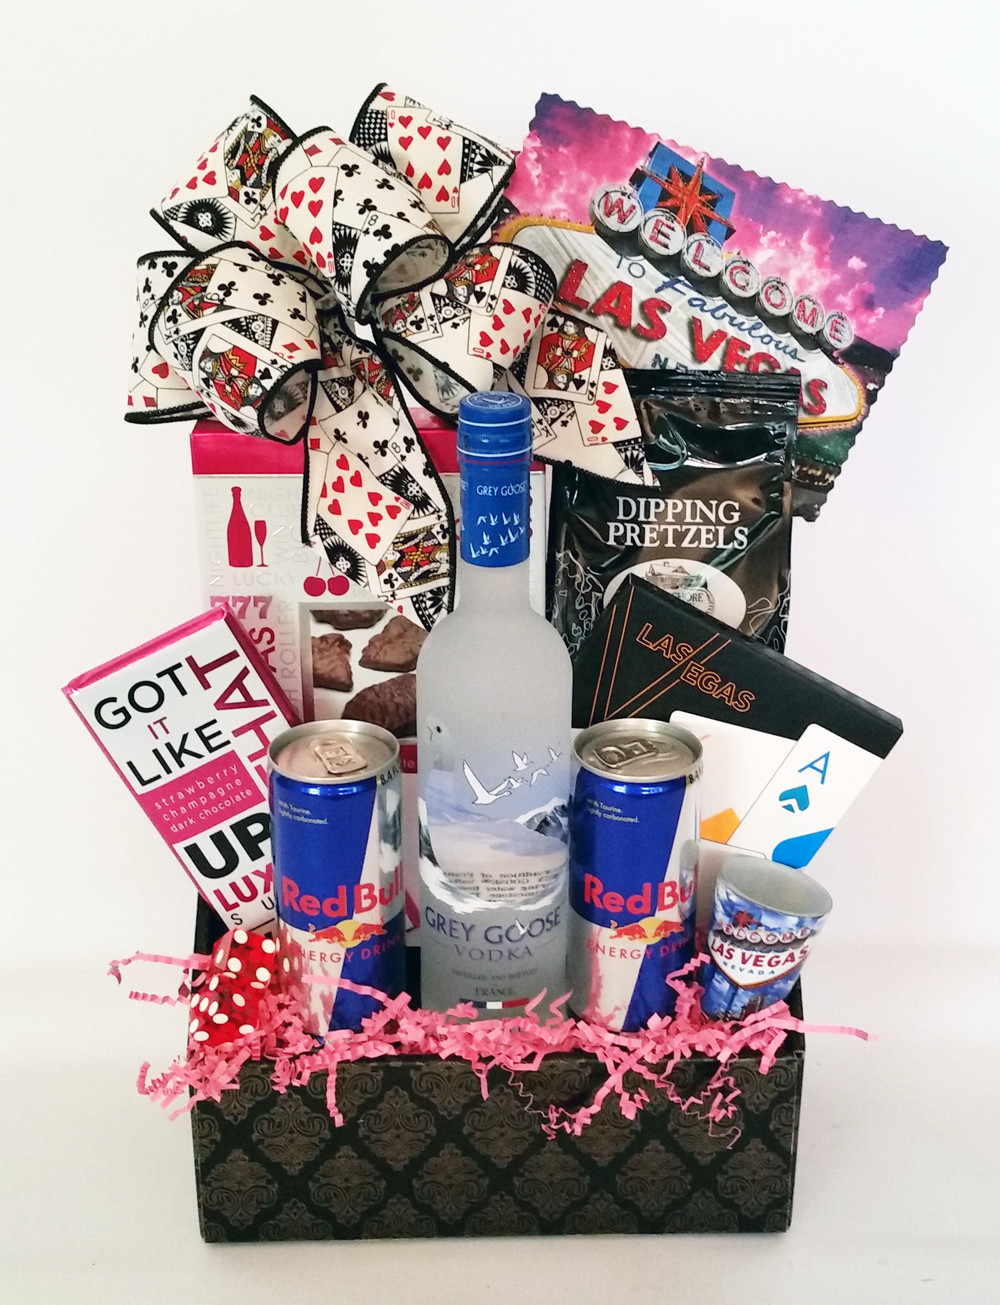 Girls Night Out Gift Ideas
 Girls Night Out Gift Basket Ideas Basket Poster